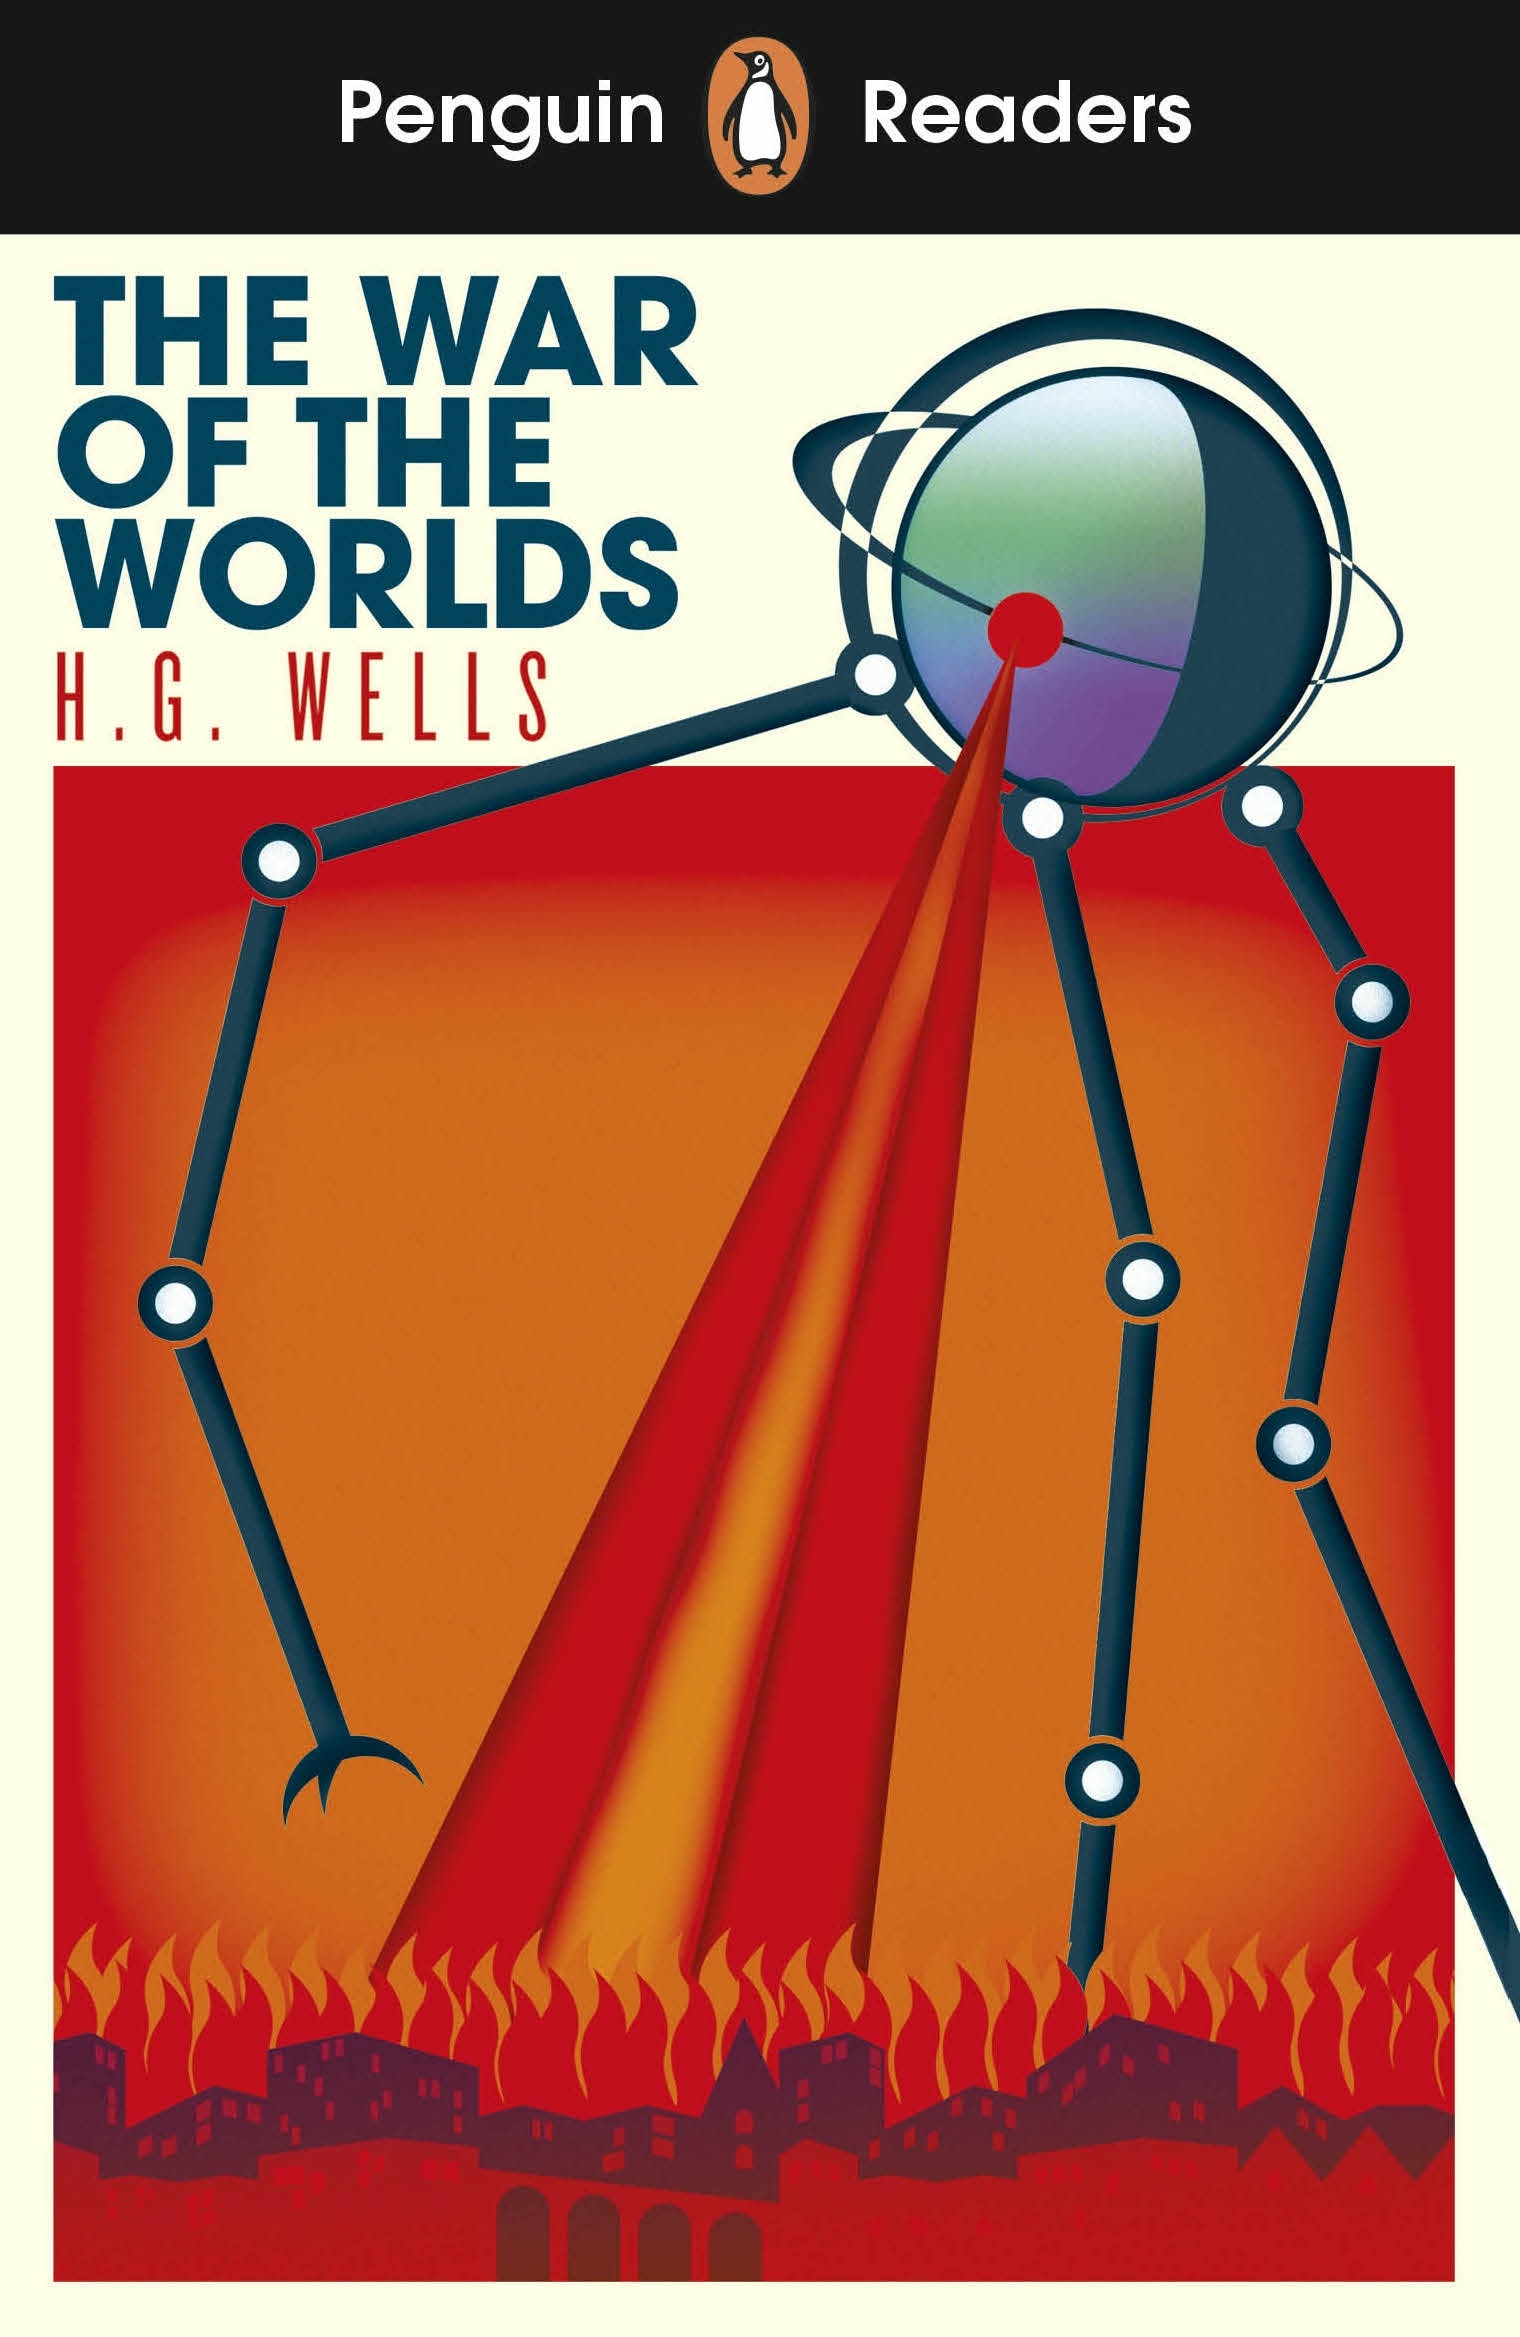 Book “Penguin Readers Level 1: The War of the Worlds (ELT Graded Reader)” by H G Wells — February 2, 2023